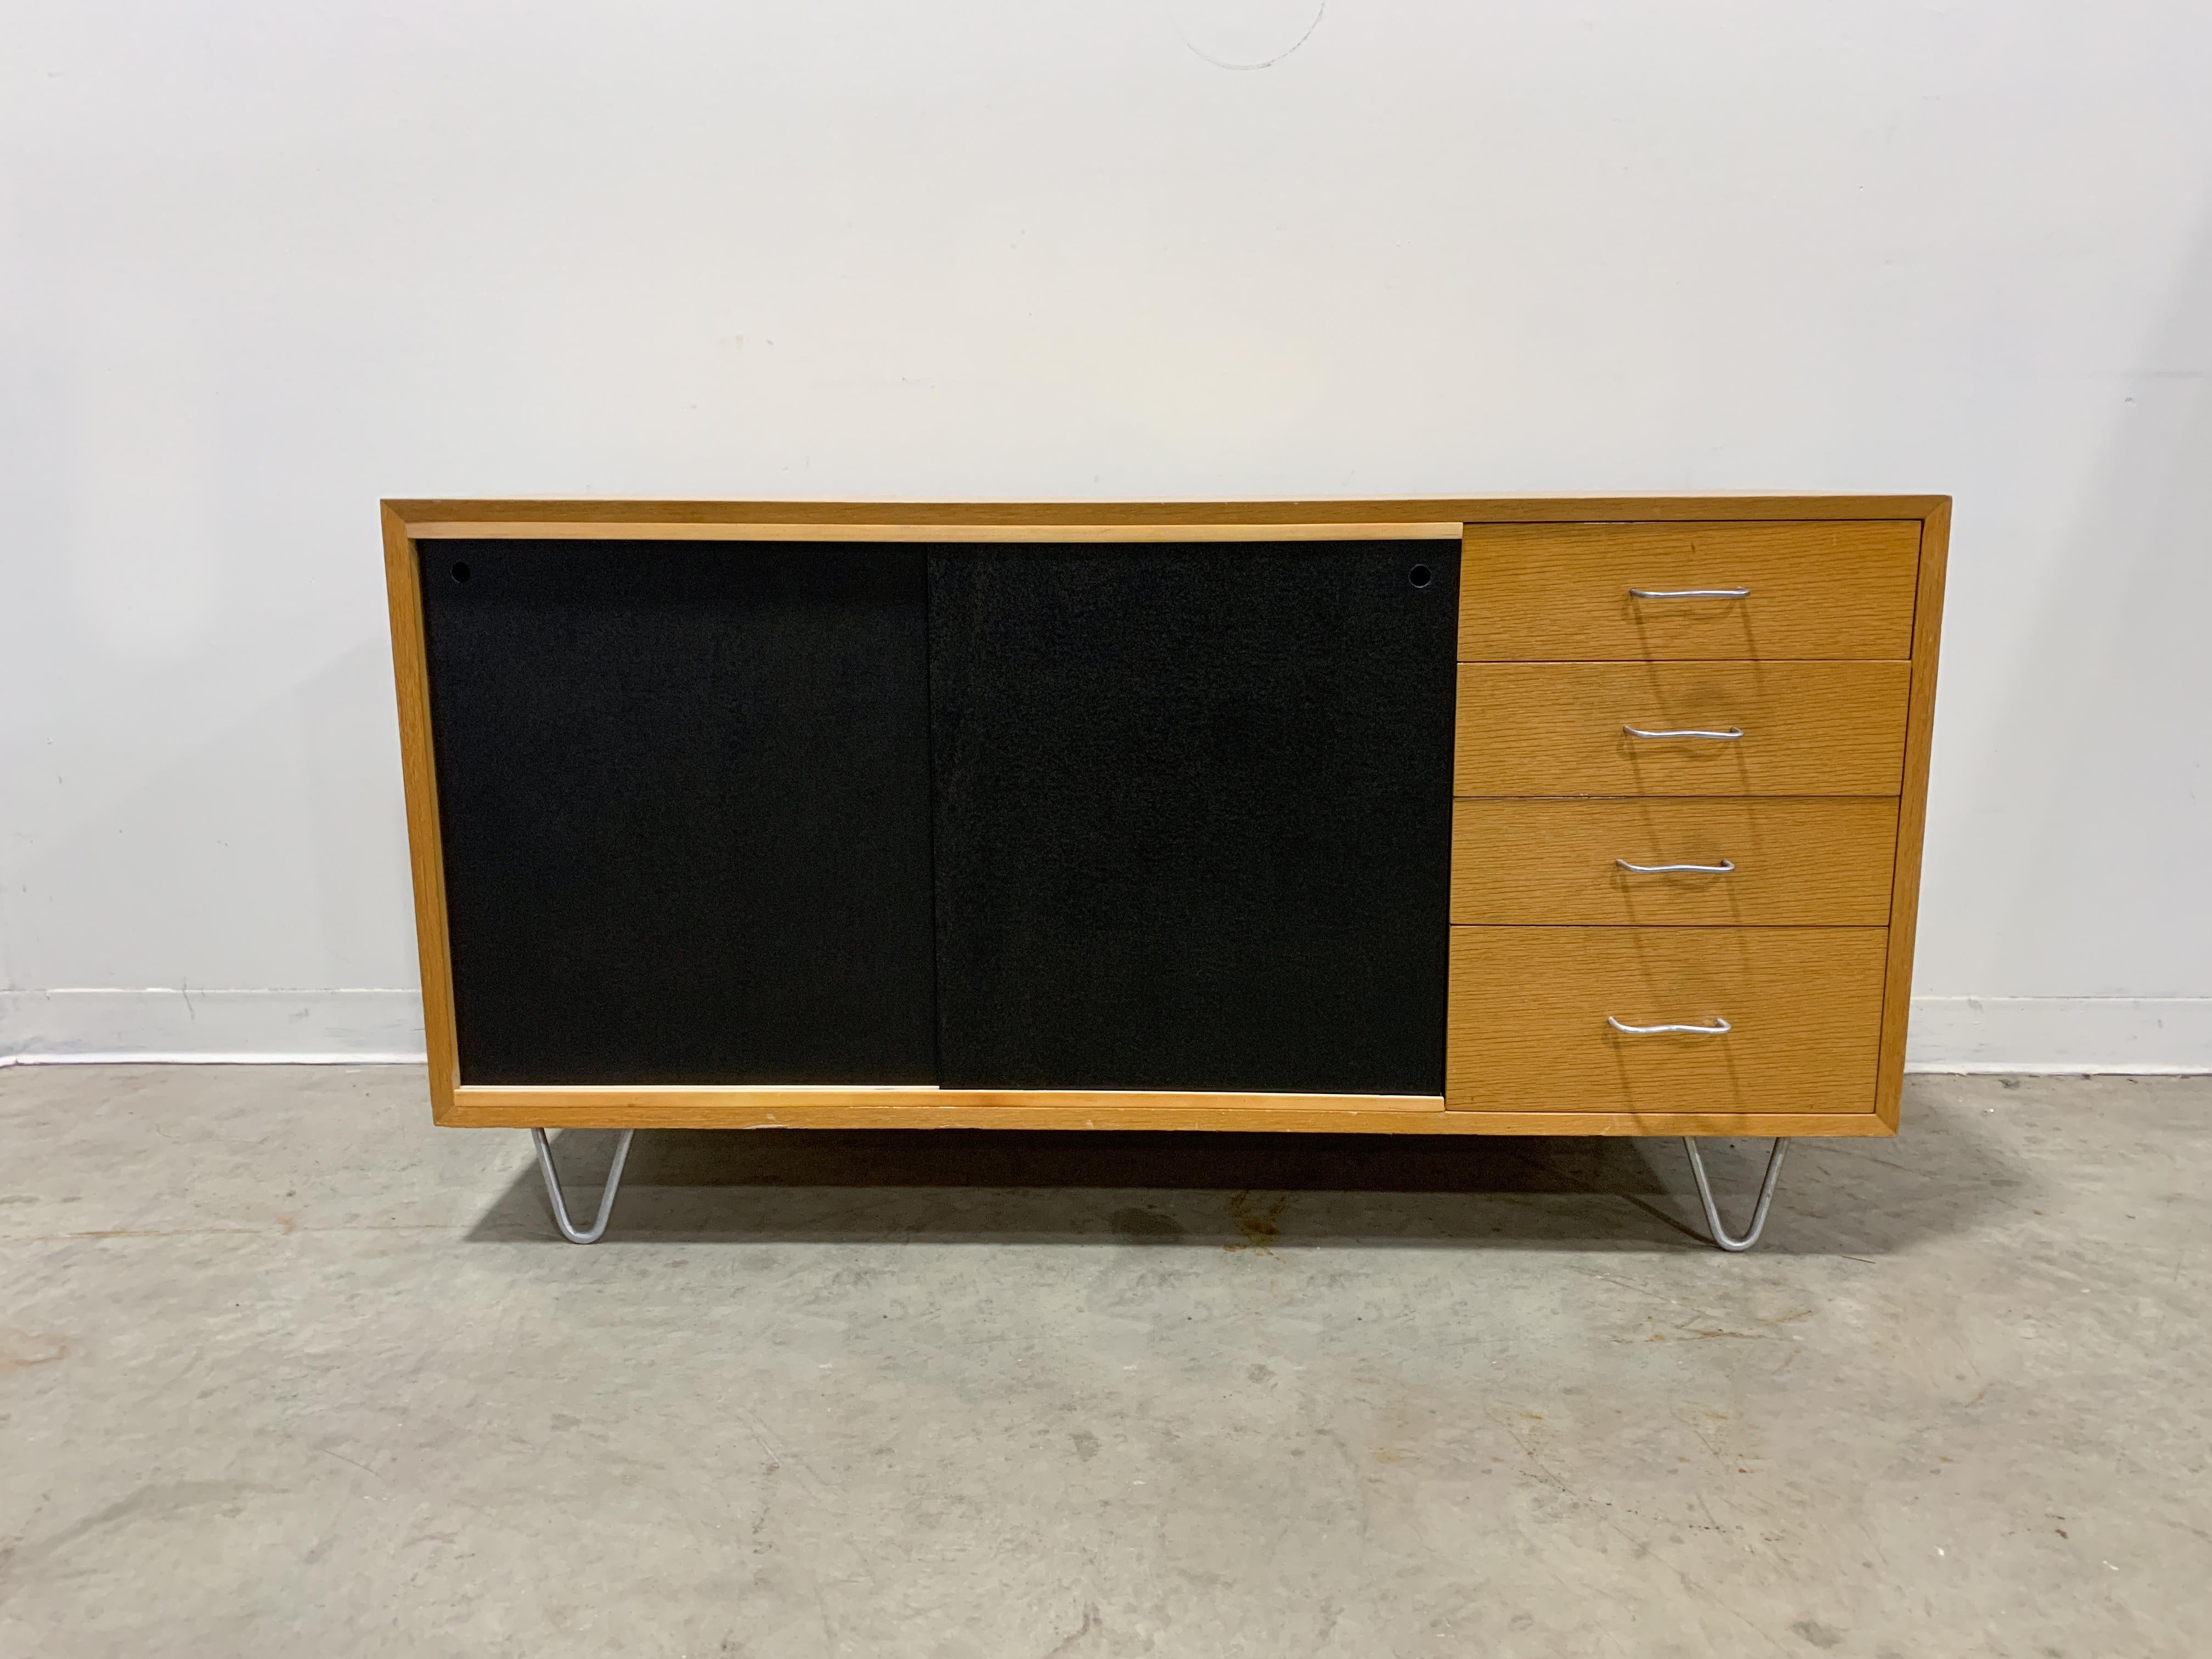 Unique sideboard from Herman Miller's BCS line in the early 1950s. Blonde oak veneered cabinet with bent aluminium pulls and hairpin legs. This cabinet has been modified to include sliding doors. Originally the cabinet had normal swing doors but